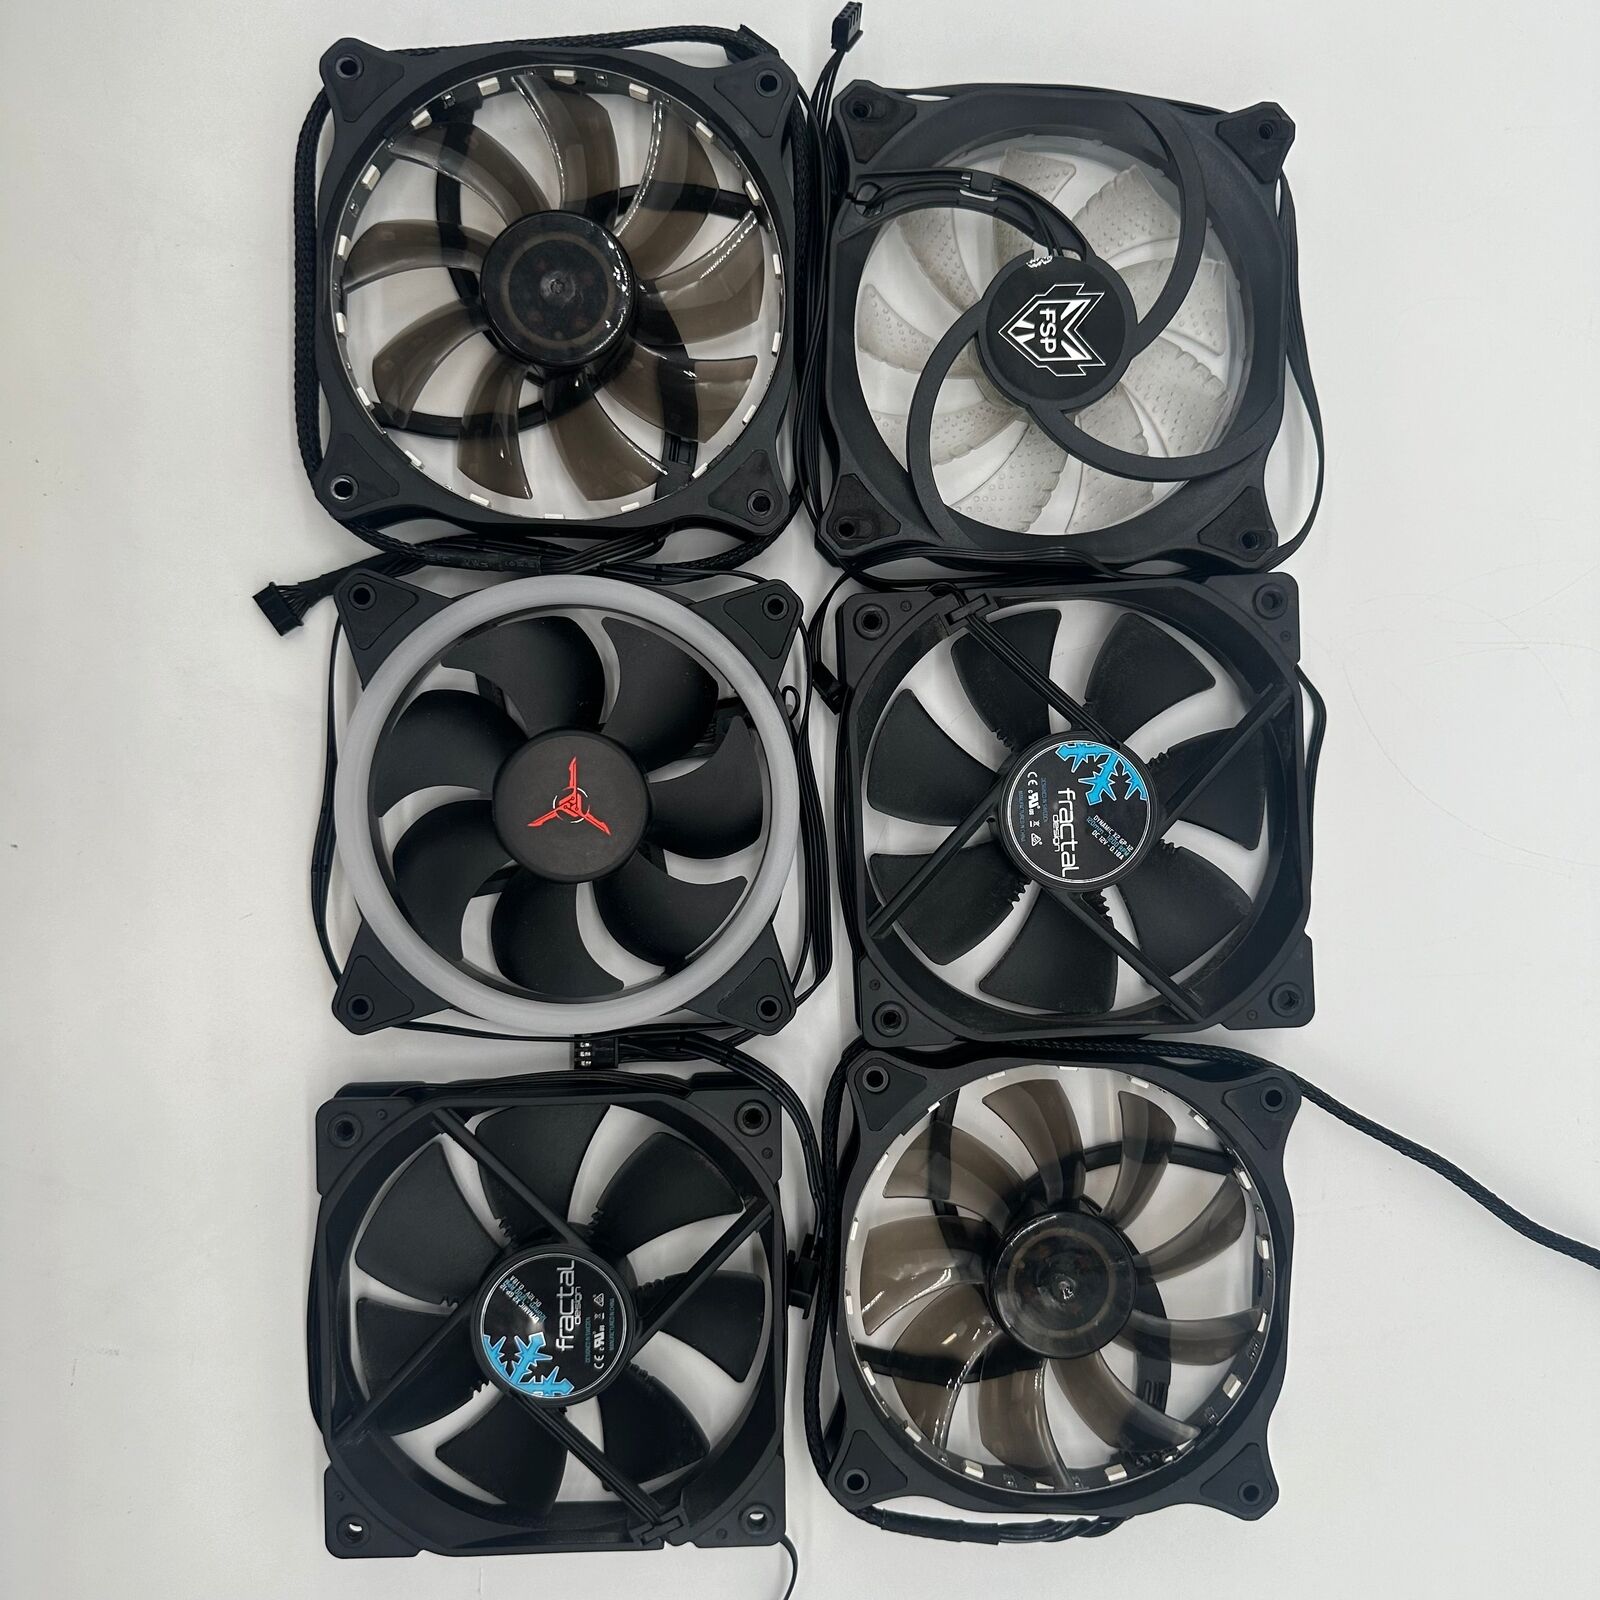 Lot of 6 Assorted 120mm Computer Case Fans